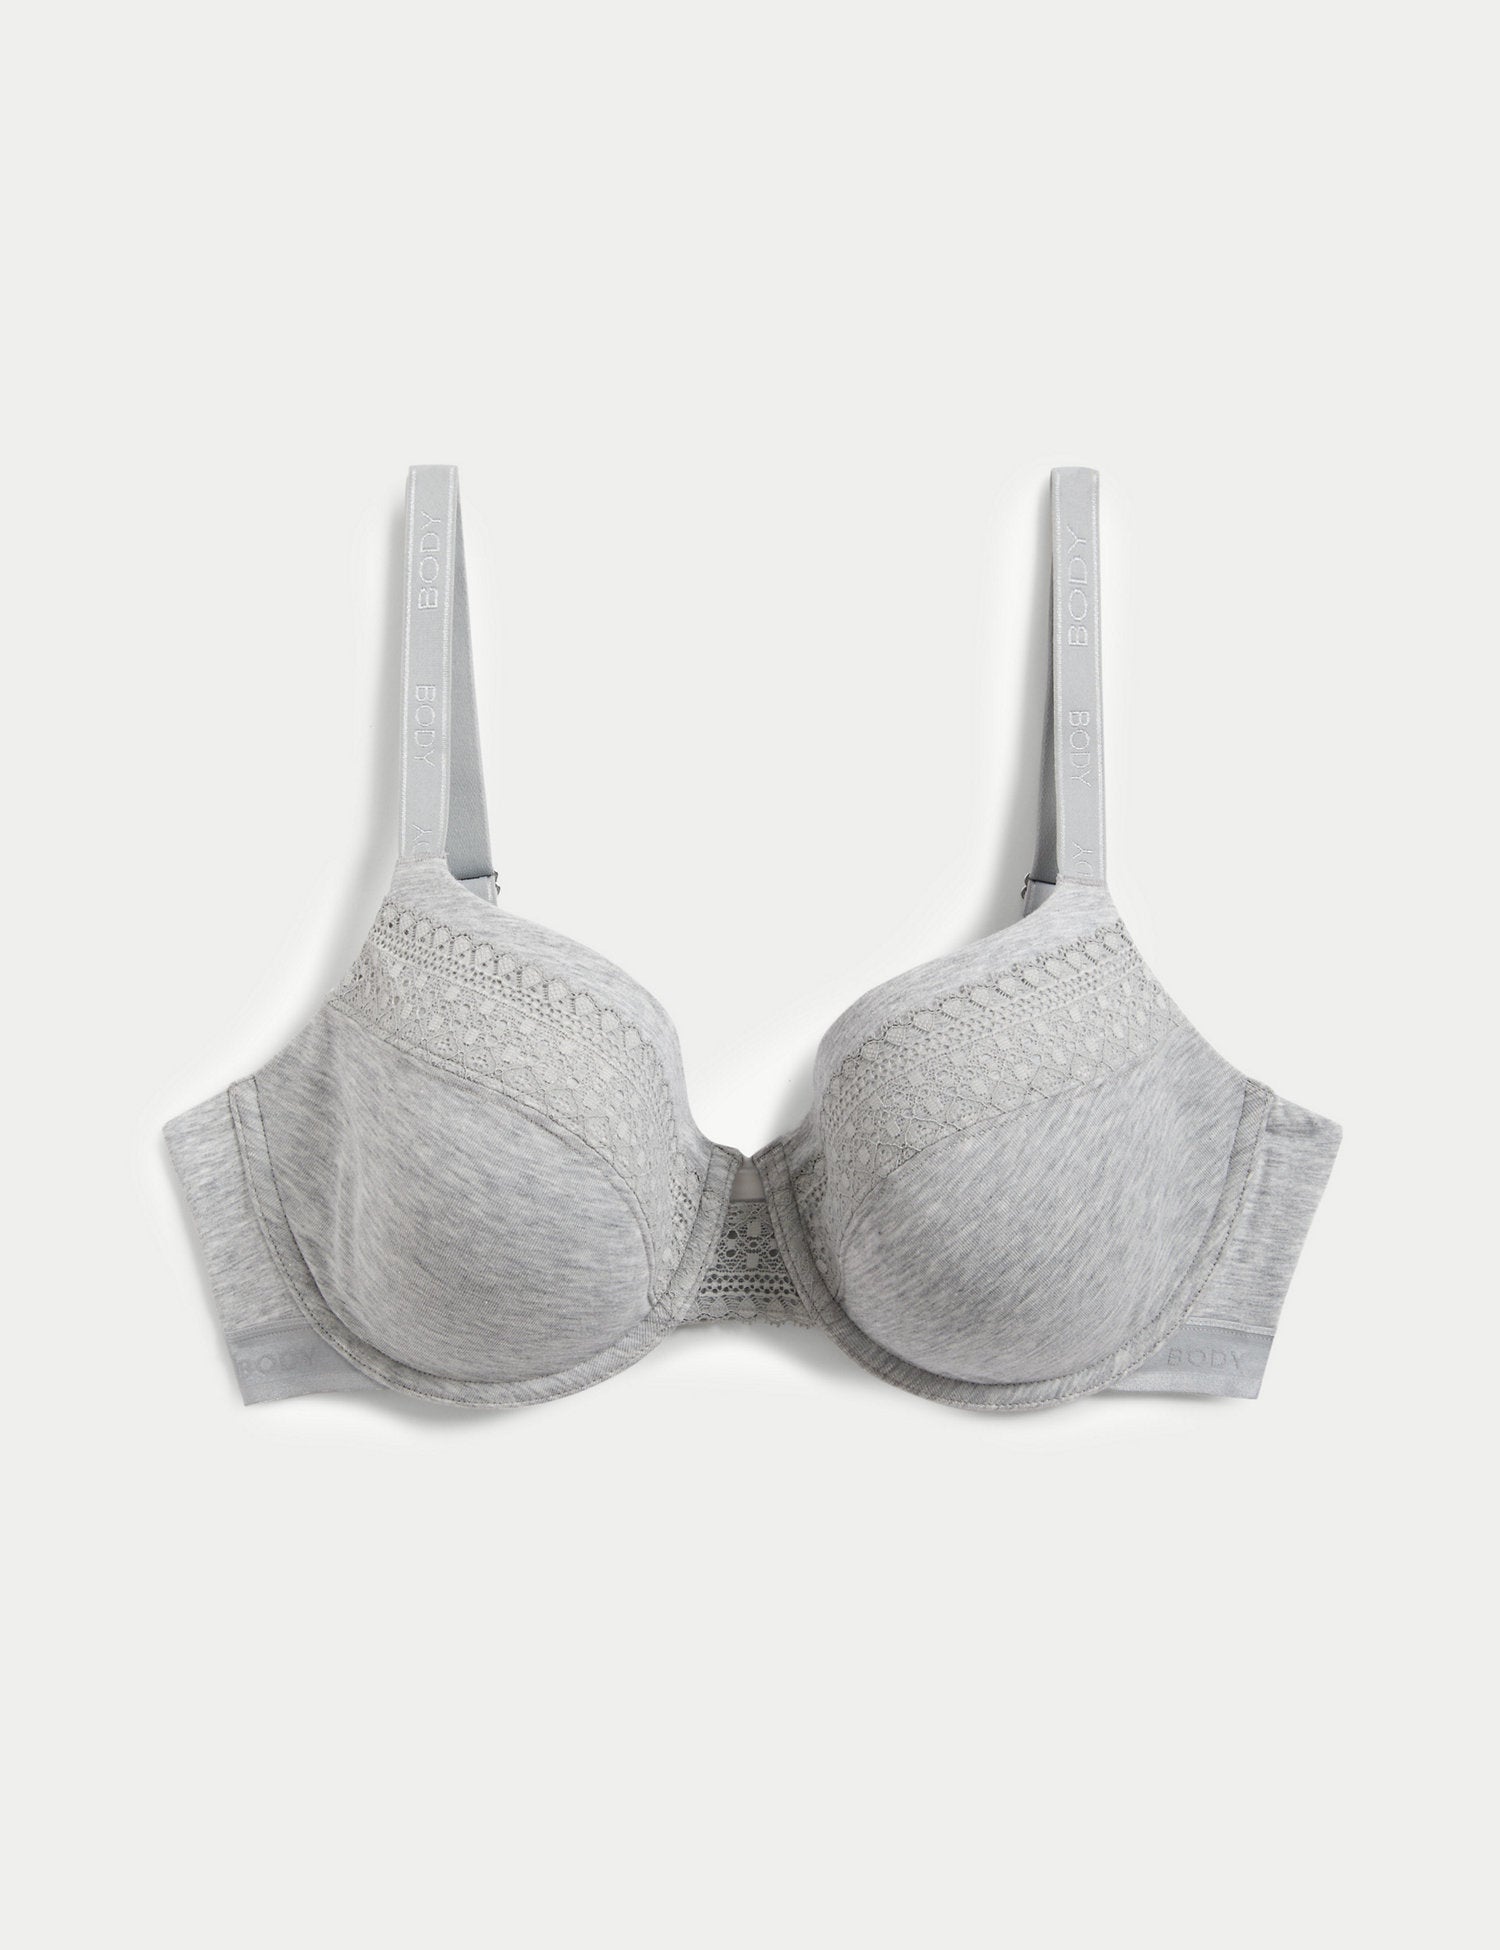 Buy Cotton Padded Non-Wired Teen T-shirt Bra In Grey Online India, Best  Prices, COD - Clovia - BB0029P01